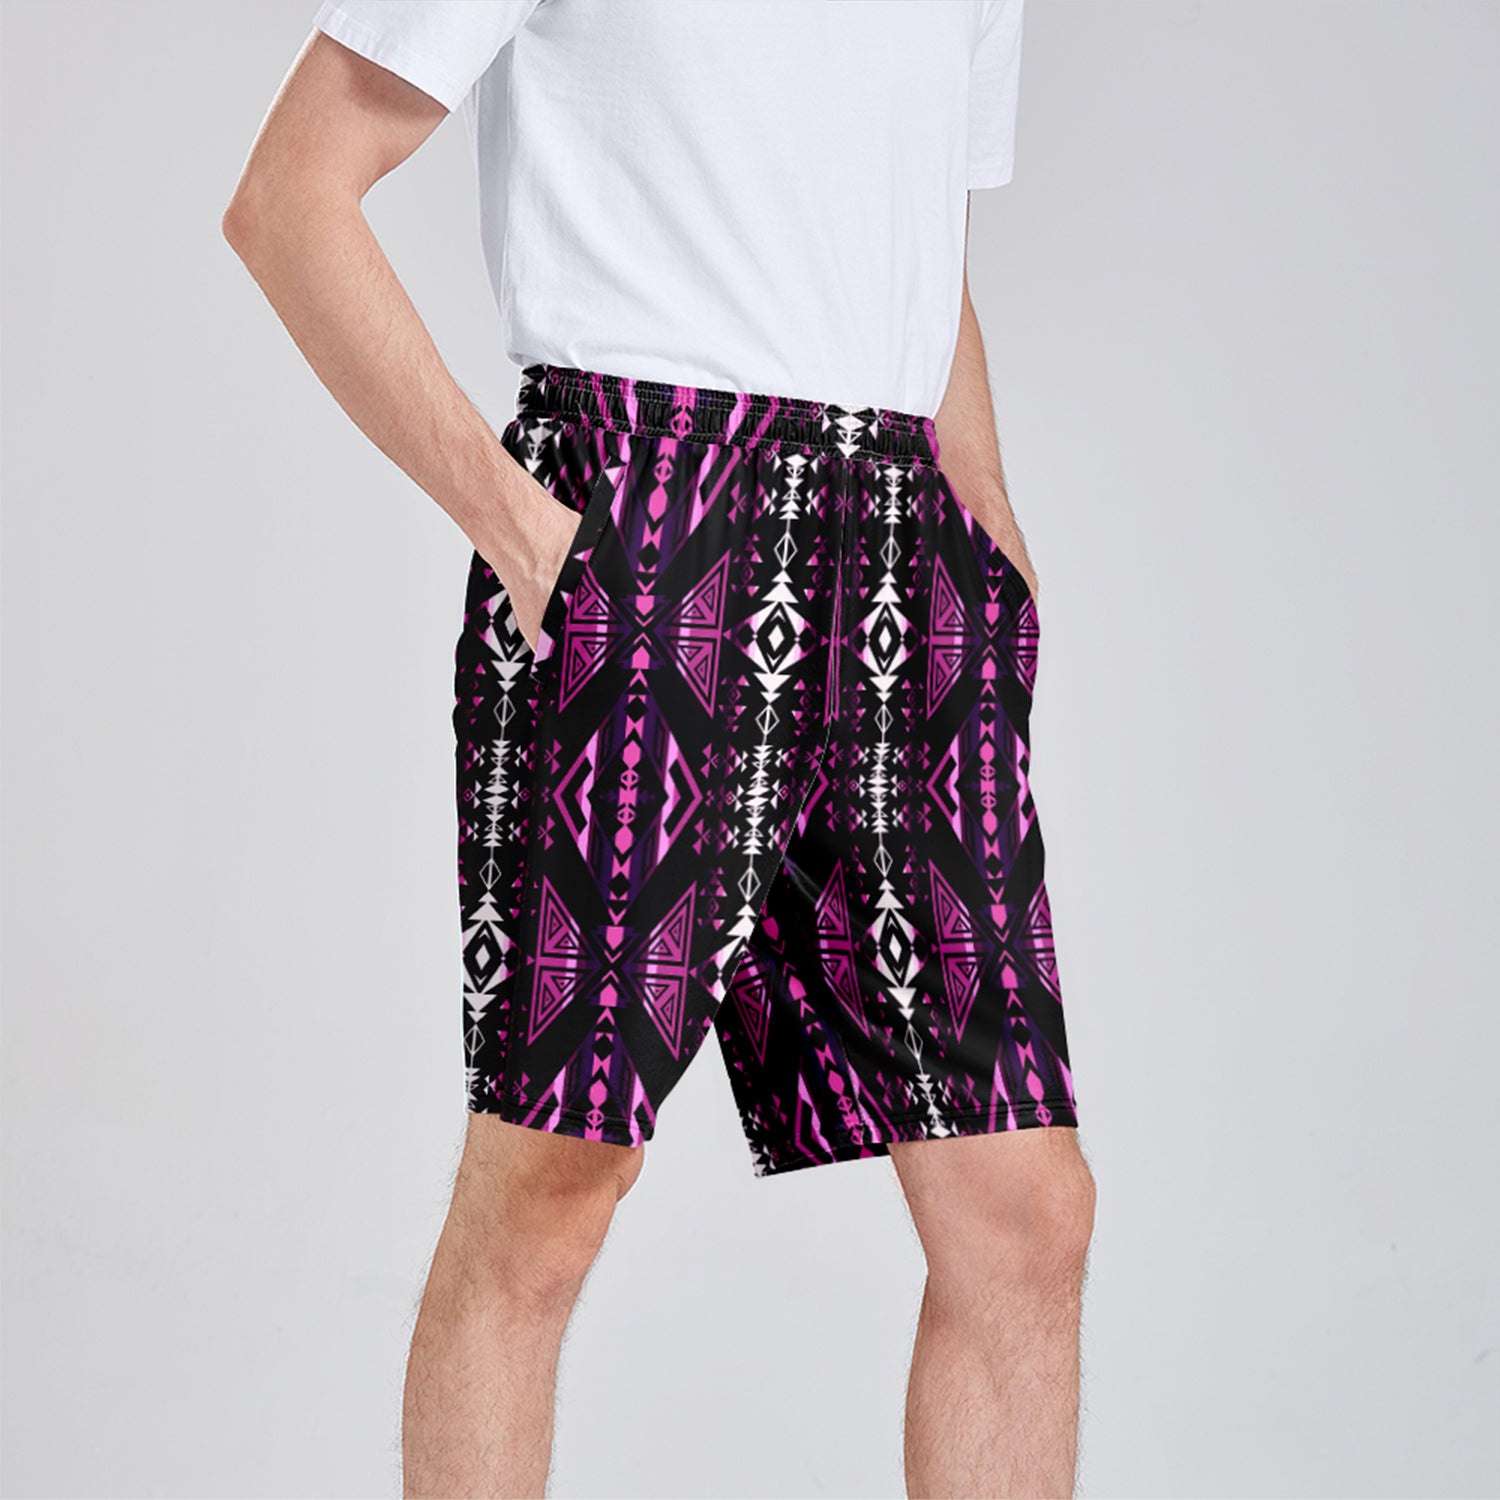 Upstream Expedition Moonlight Shadows Athletic Shorts with Pockets